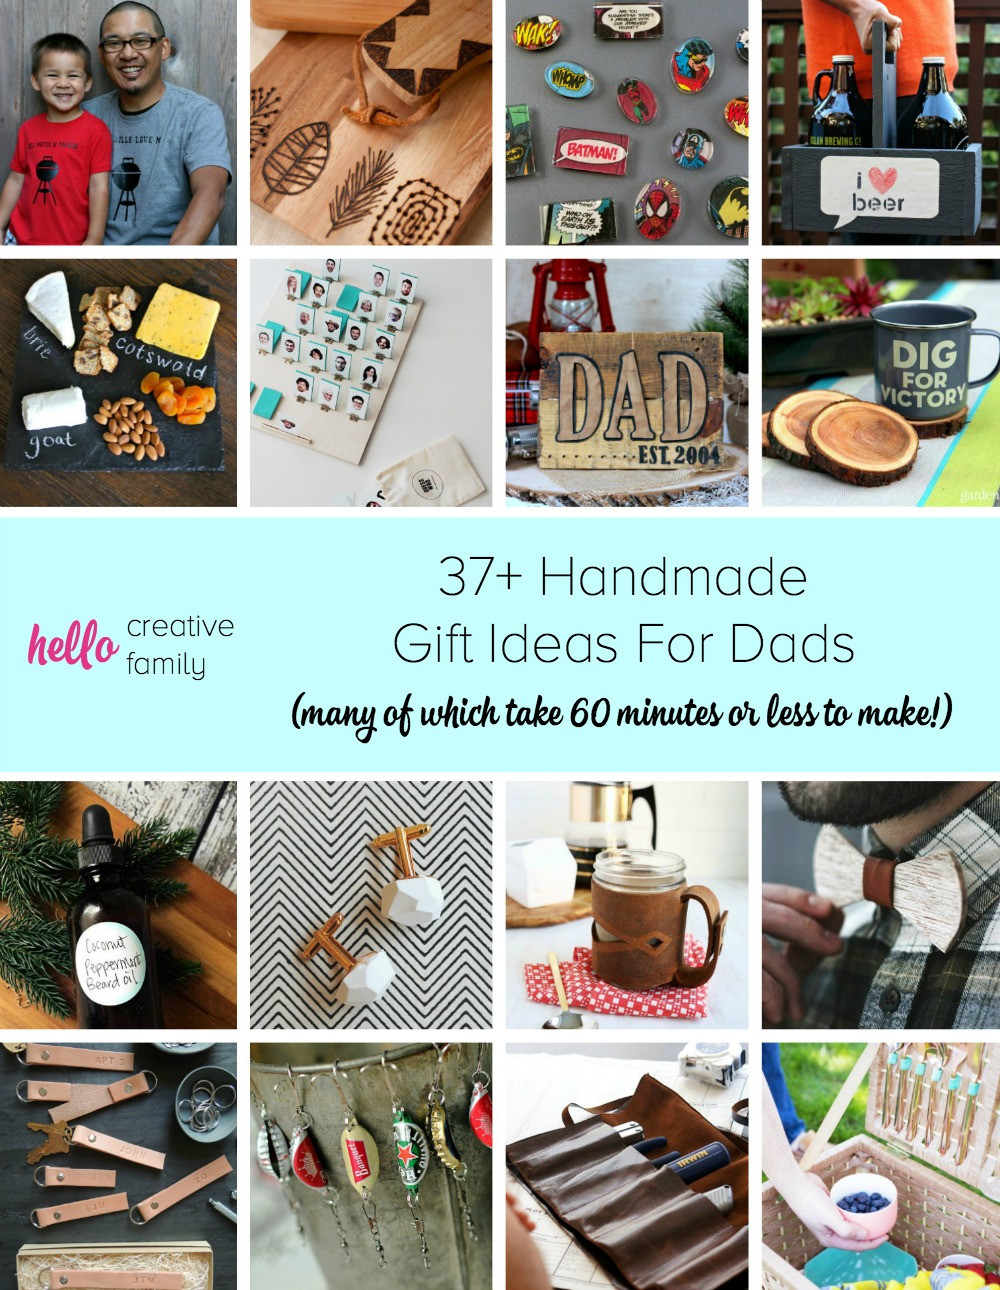 Gift Ideas For Dad From Kids
 37 Handmade Gift Ideas For Dads many of which take 60